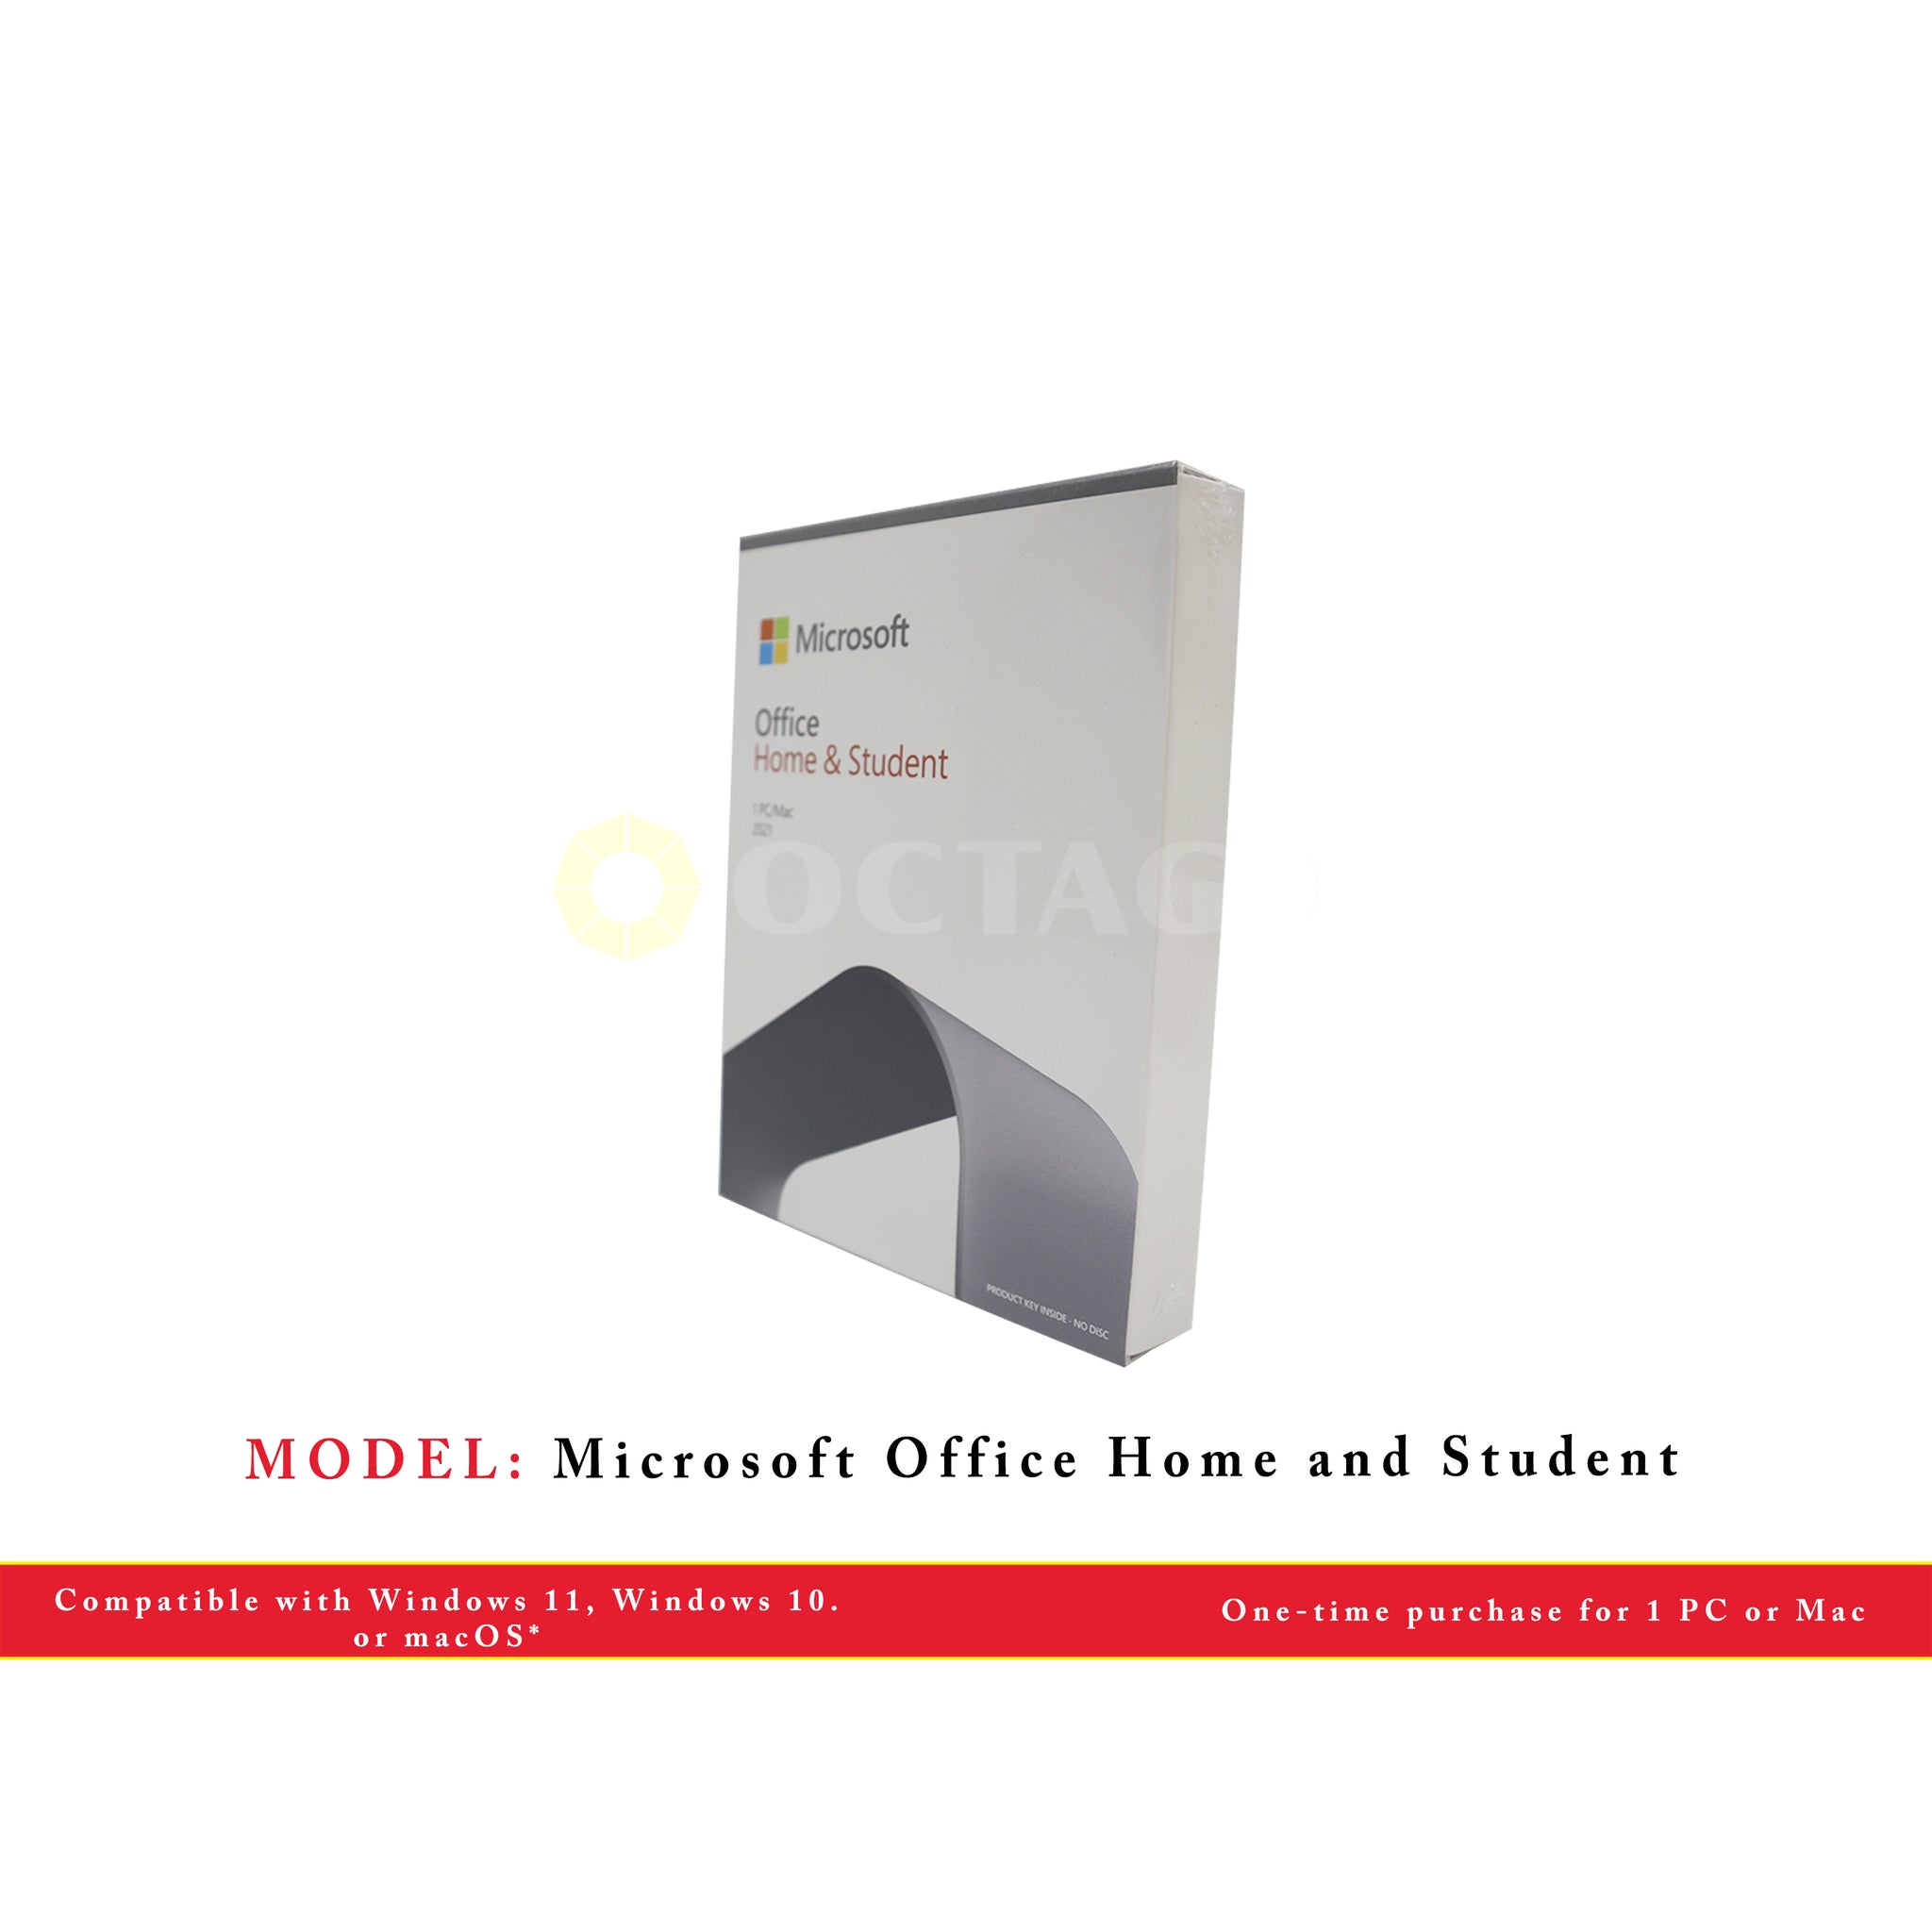 MS OFFICE HOME & STUDENT